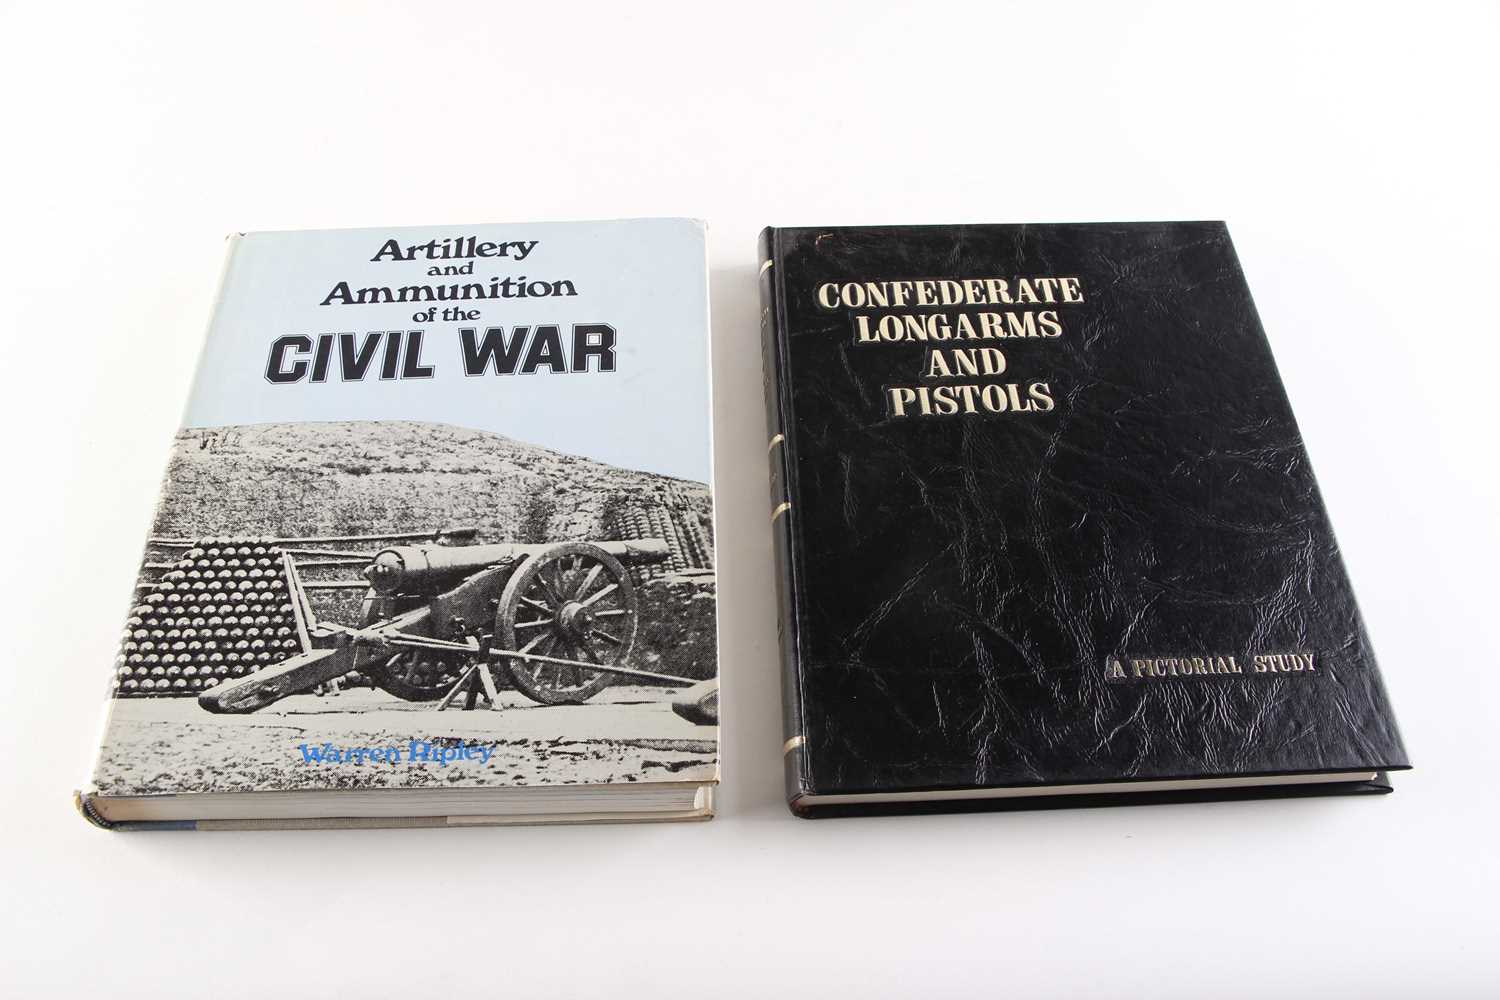 2 Vols: Artillery and Ammunition of the Civil War by Warren Ripley; Confederate Longarms and Pistols